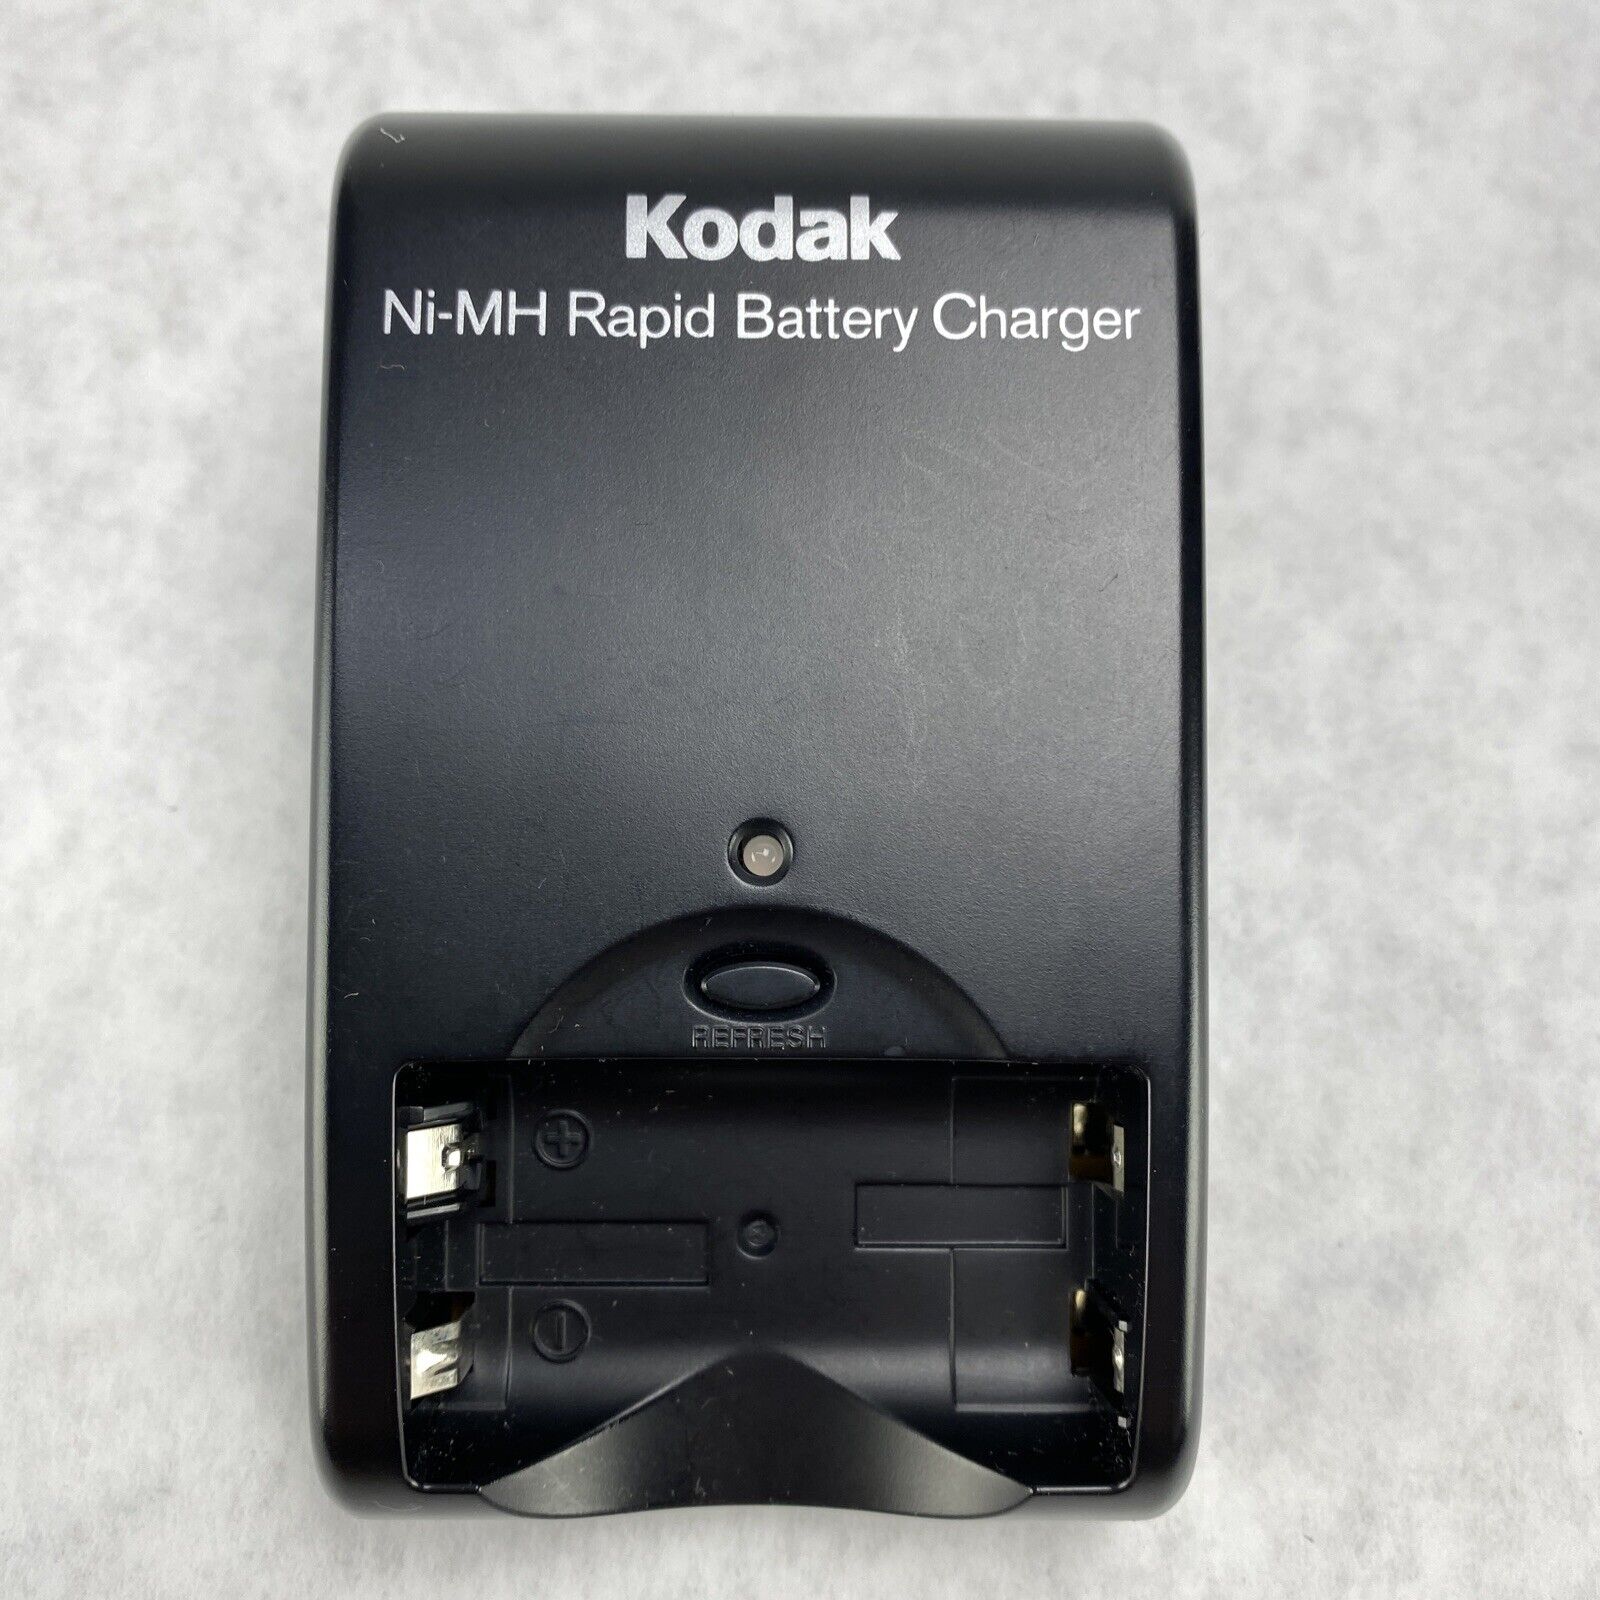 Kodak K4500 Battery Charger + Carrying Camera Case Pouch Small Padded Satchel